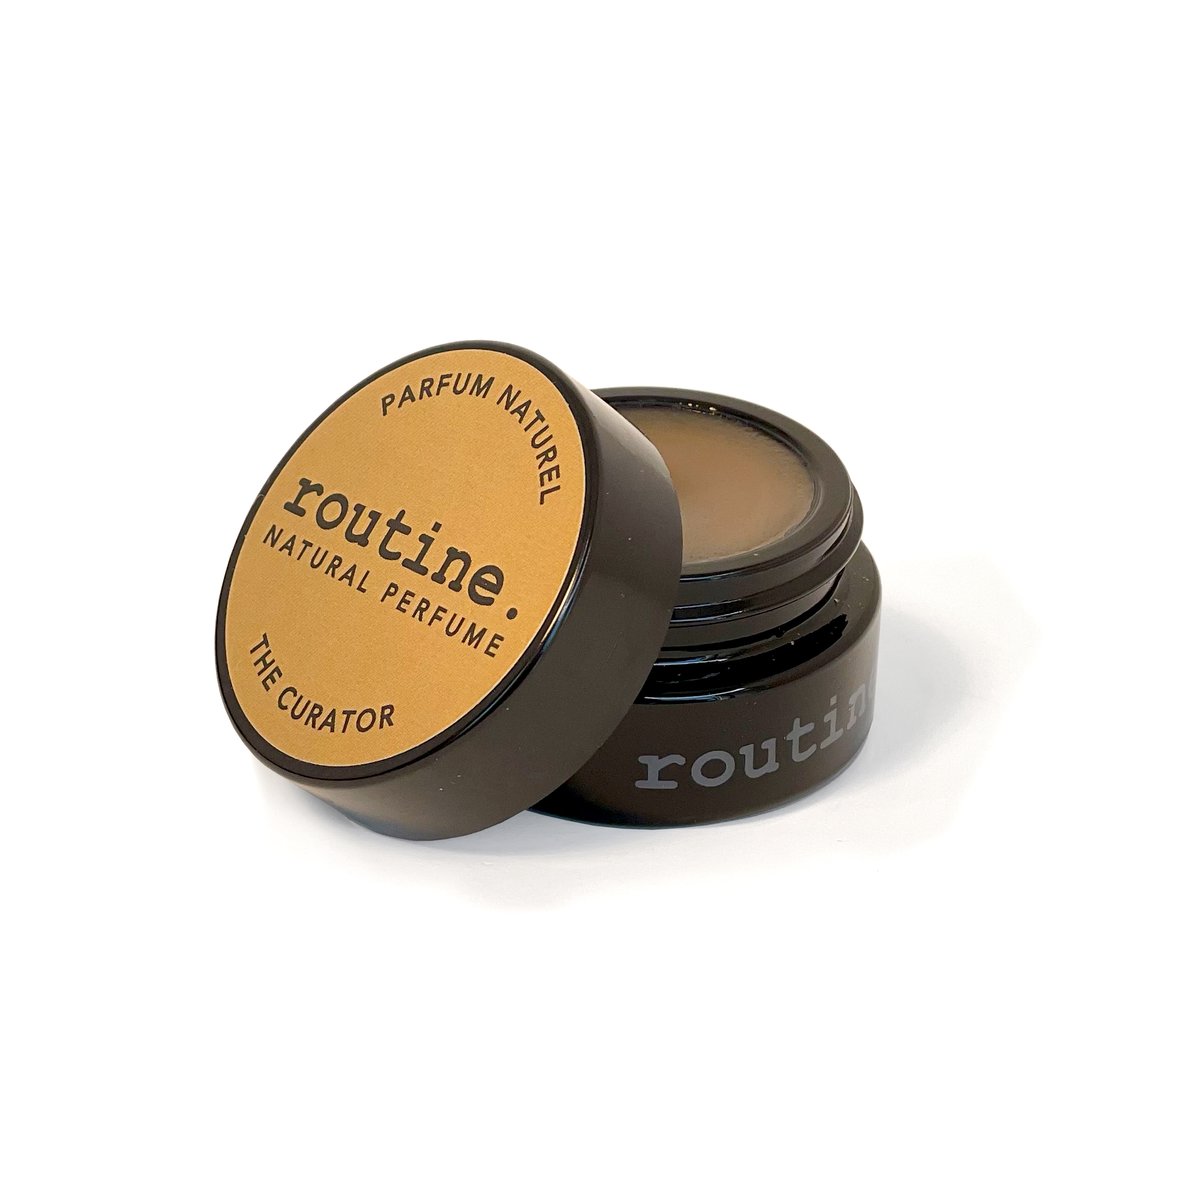 THE CURATOR SOLID PERFUME - 15G